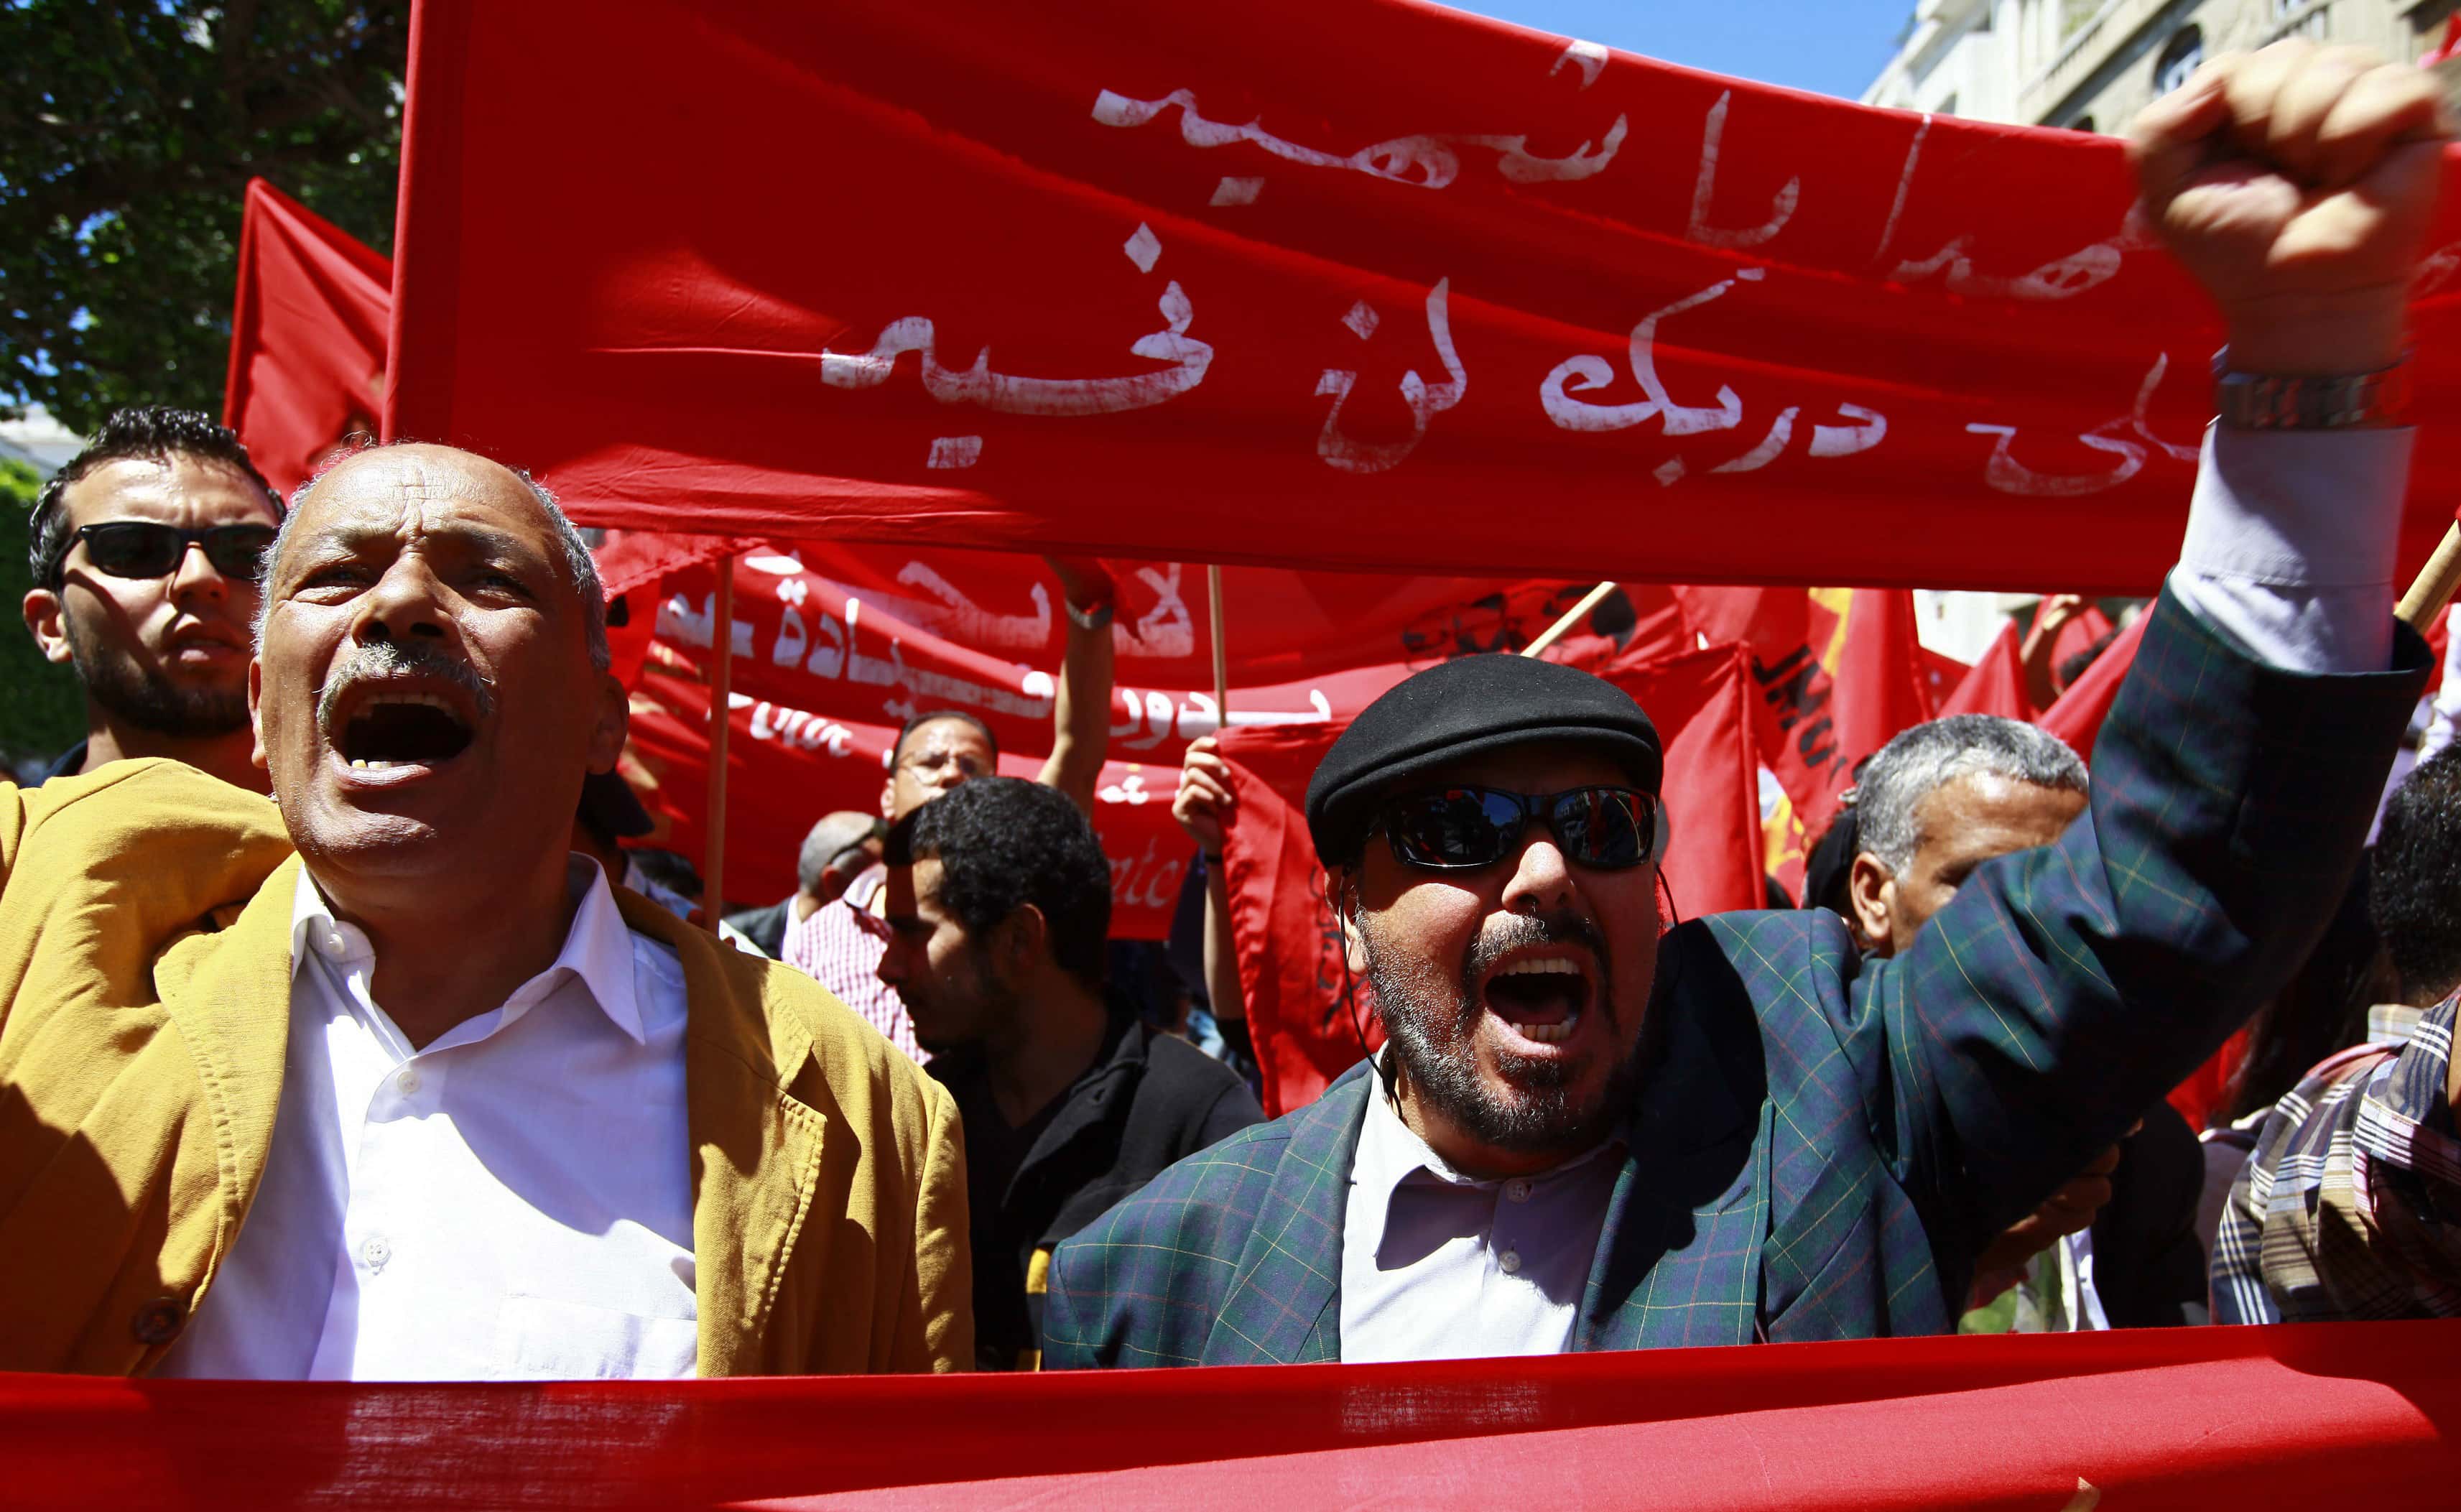 Tunisians march to commemorate International Workers' Day, or Labour Day, on Avenue Habib Bourguiba in Tunis on 1 May 2014, REUTERS/Anis Mili